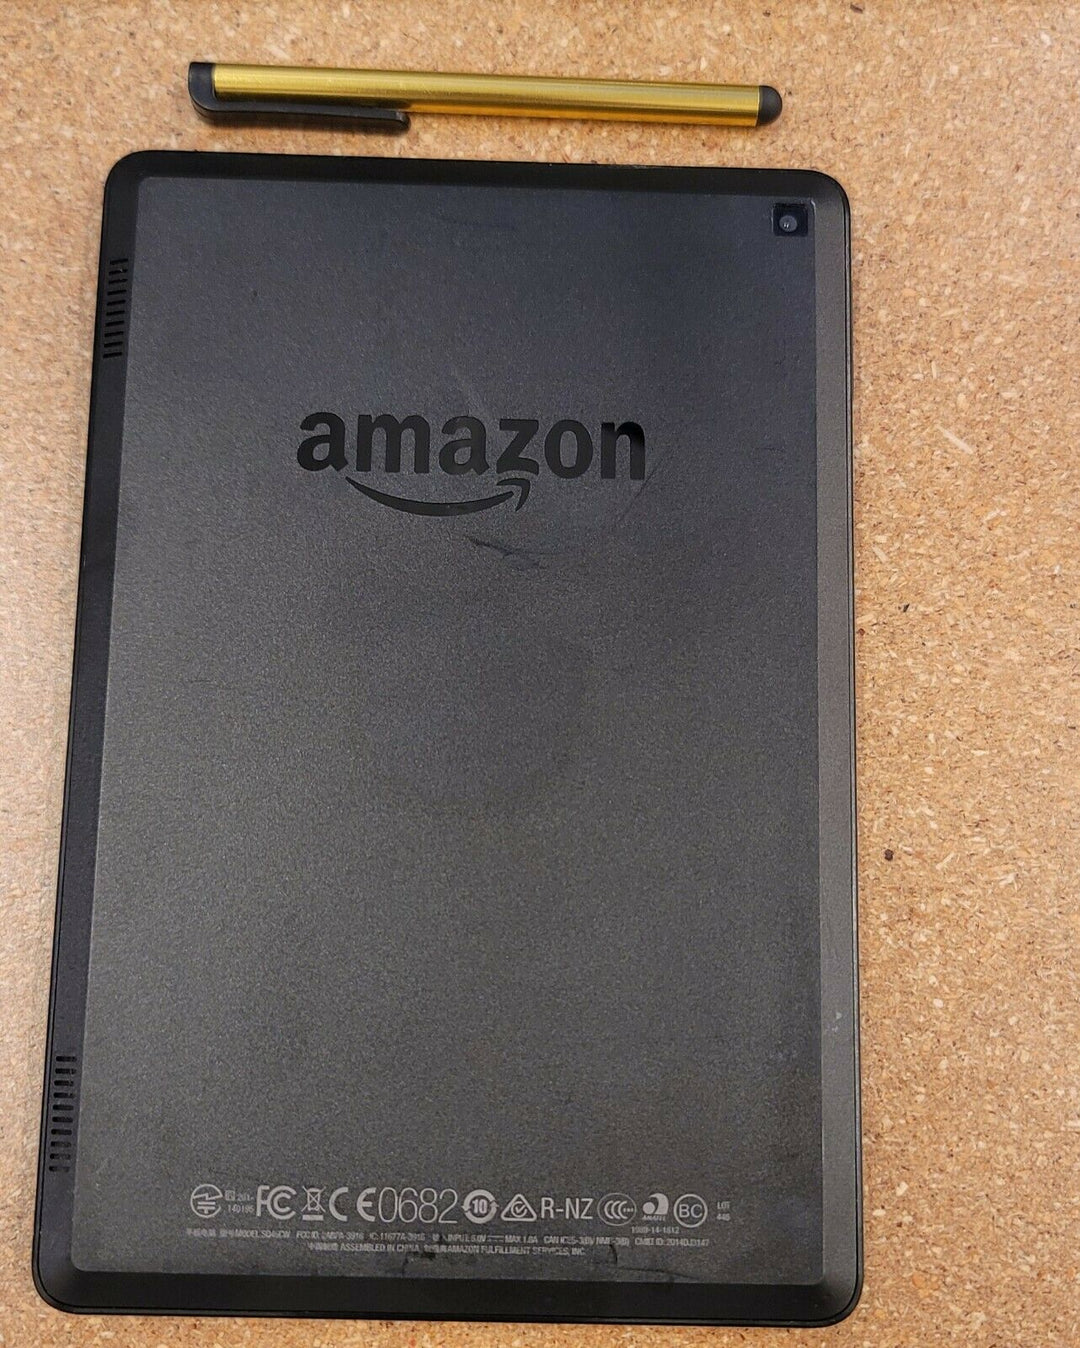 Amazon Kindle Fire HD 7" Generation 8GB Tablet - Deal Changer